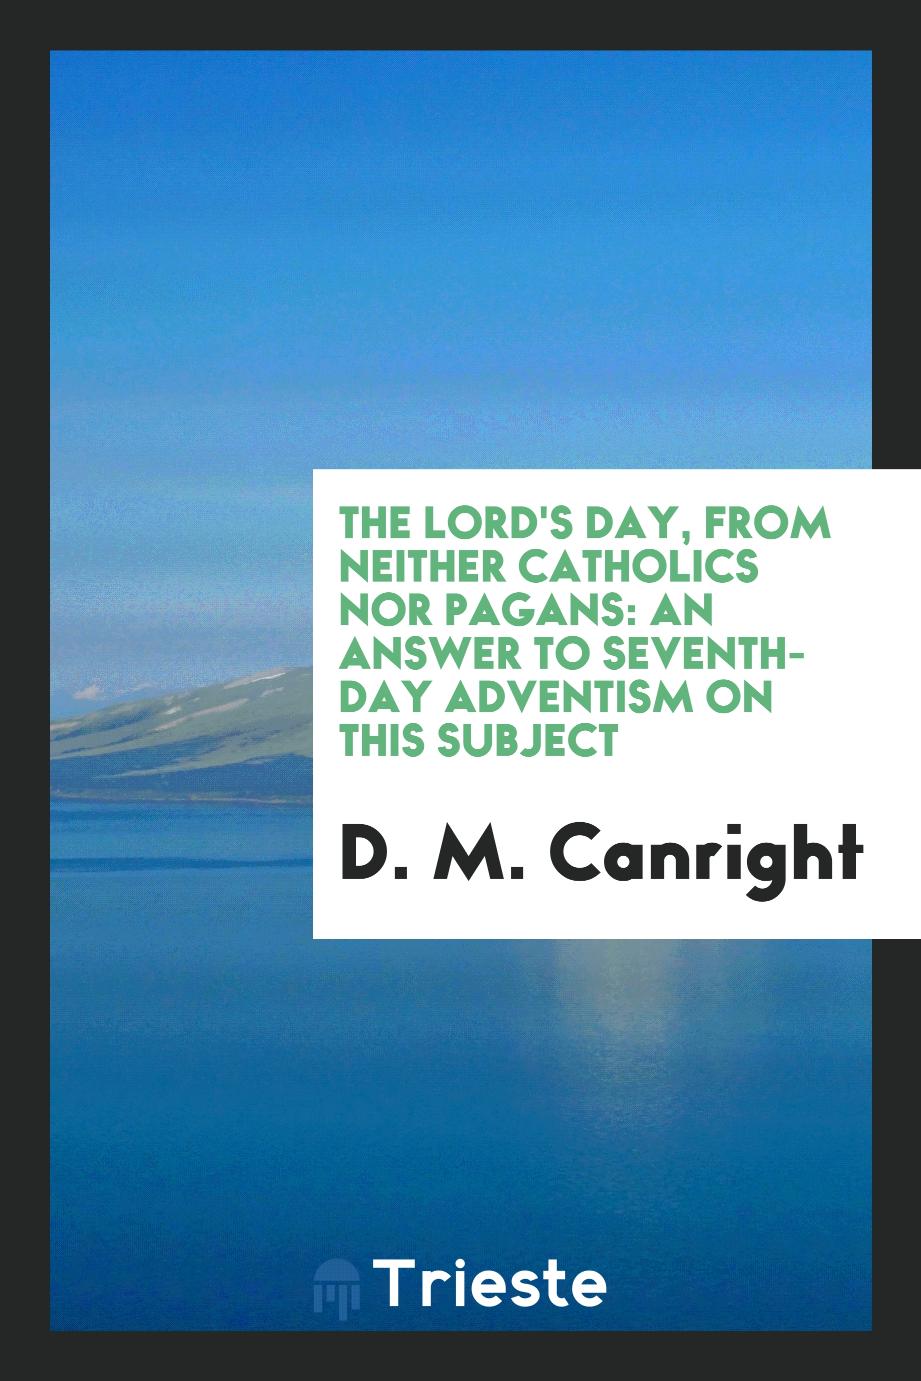 The Lord's day, from neither Catholics nor pagans: an answer to Seventh-day adventism on this subject